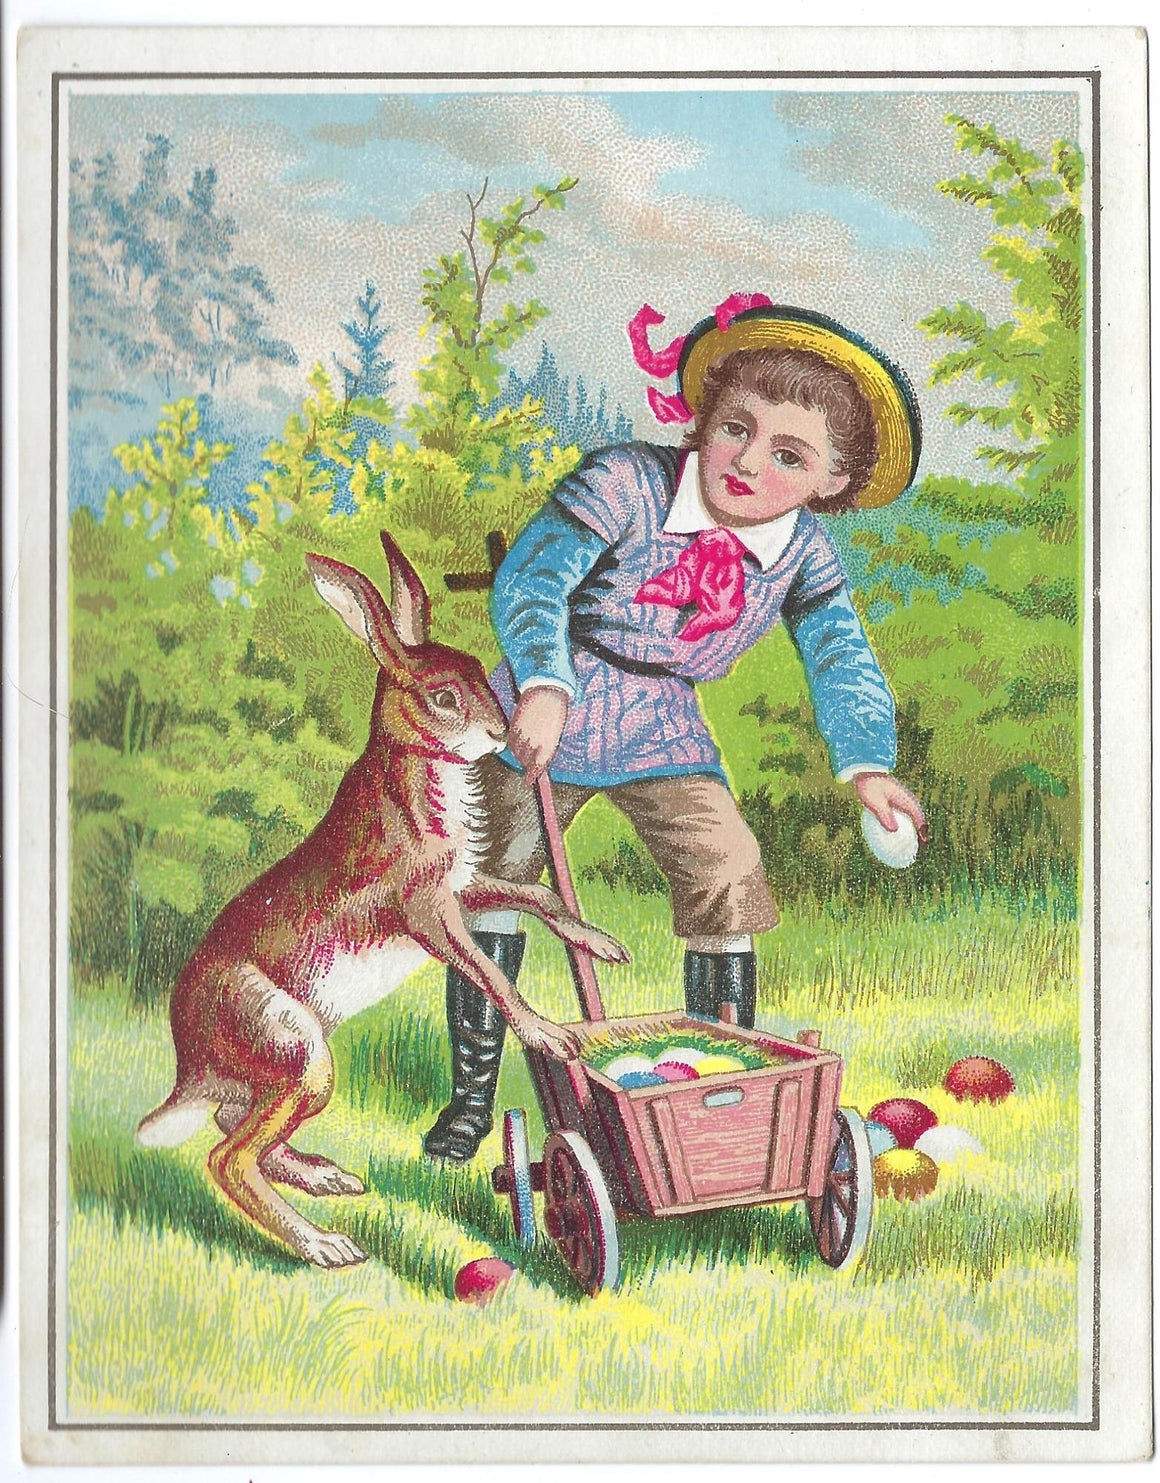 Vintage Easter Card Boy with Standing Bunny Rabbit & Wagon of Painted Eggs